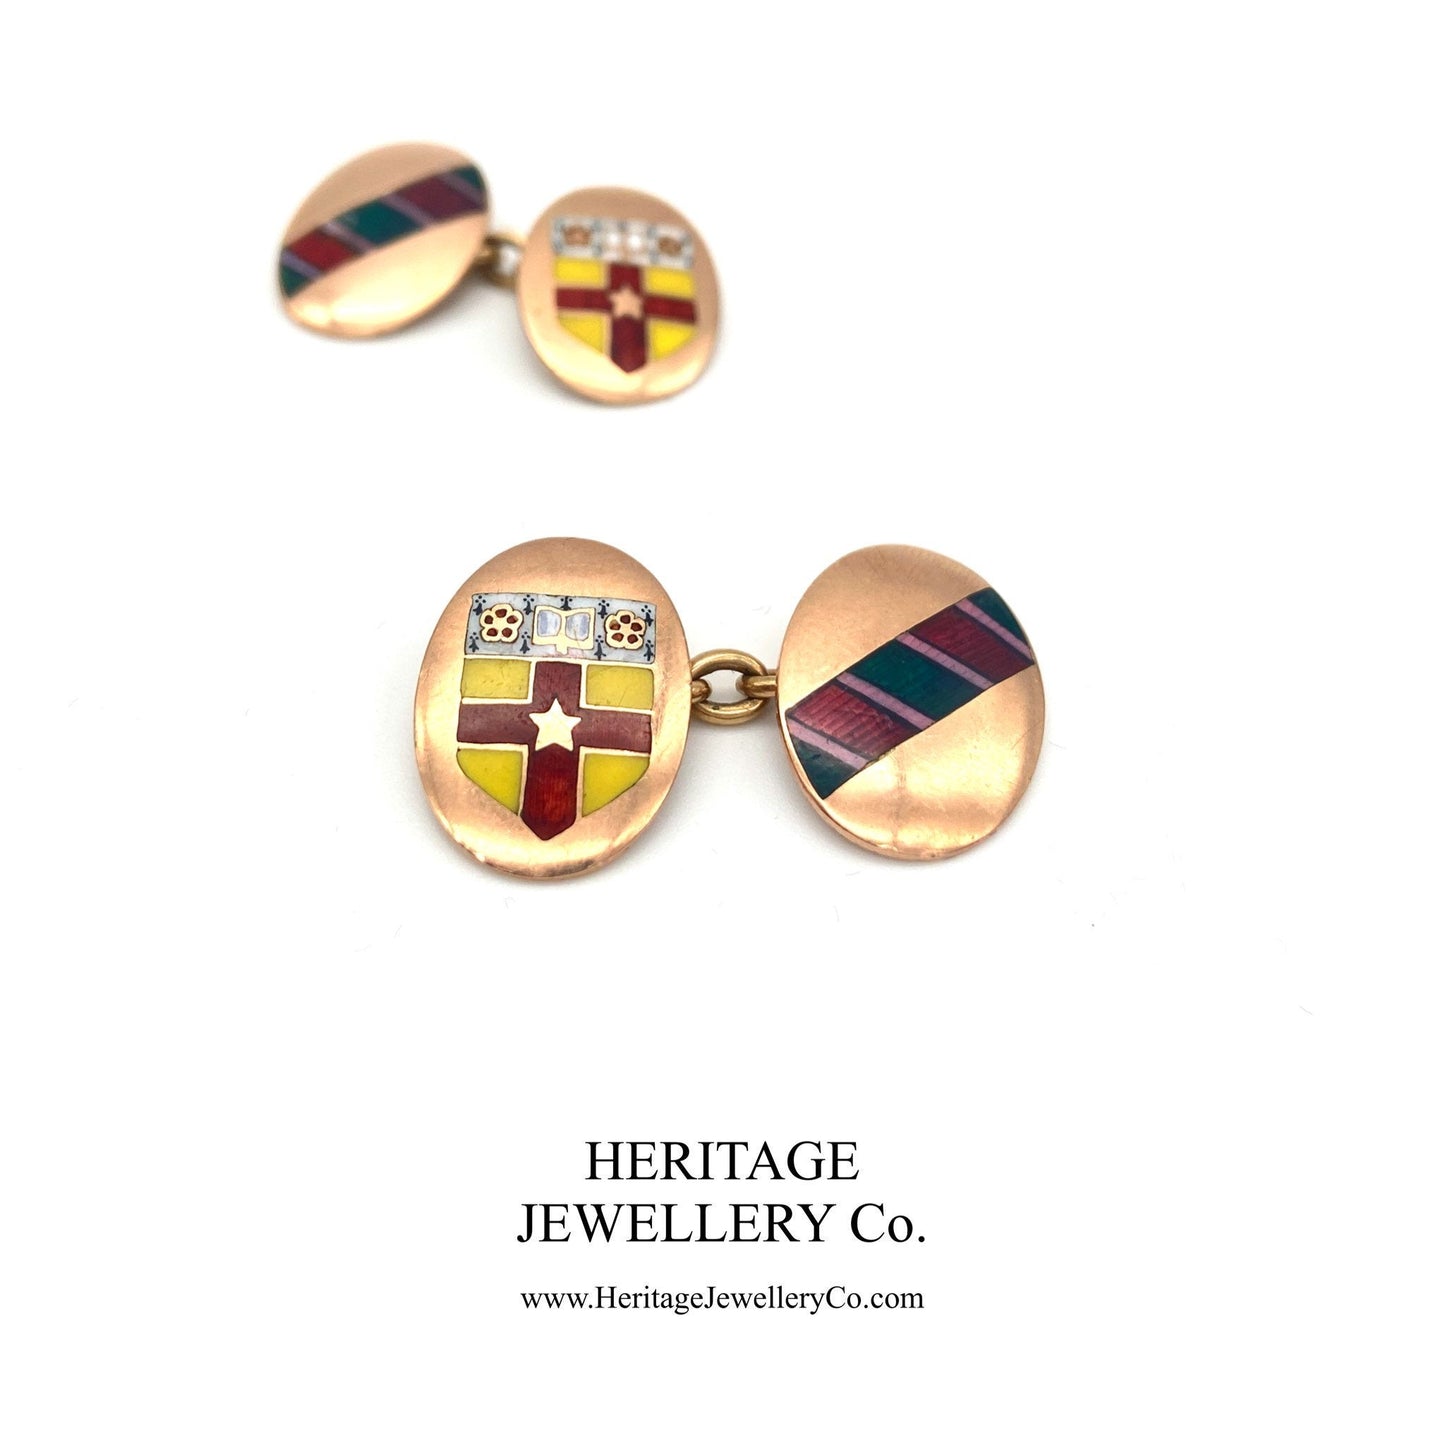 Victorian Rose Gold Cufflinks with Enamel and Antique Box